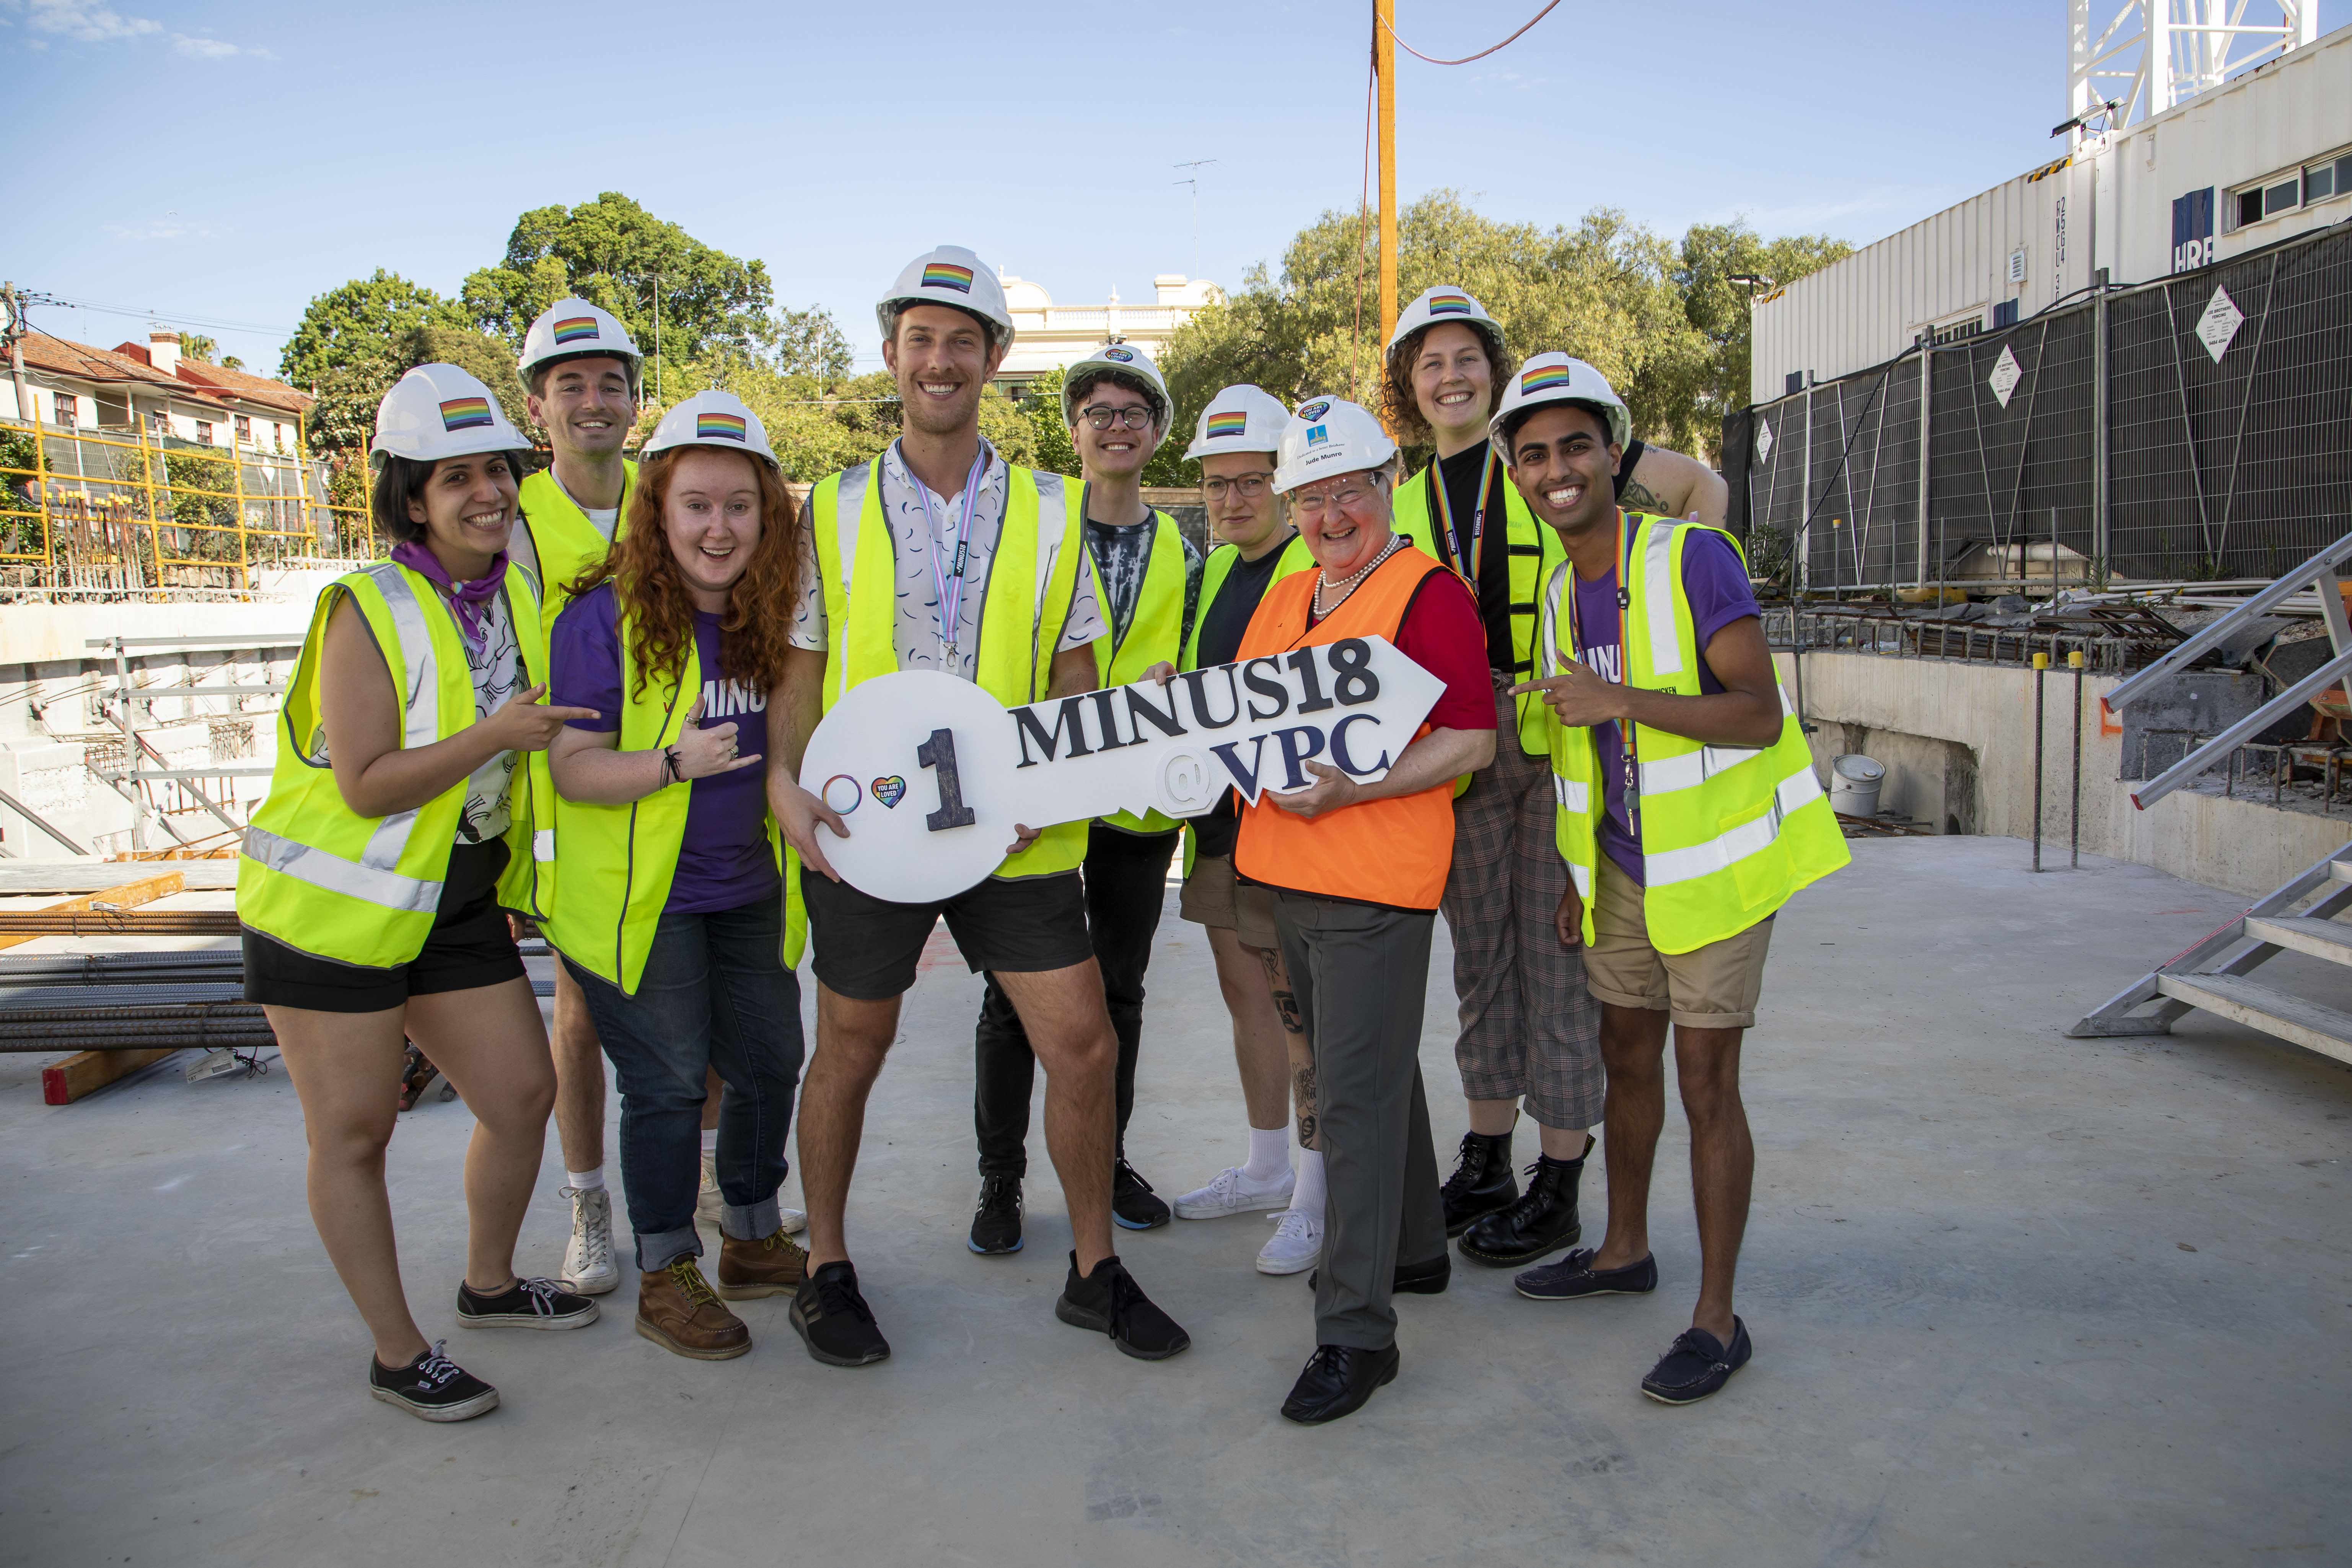 VPC Chair Jude Munro AO, Minus18 CEO Micah Scott and team mark the signing of their tenancy agreement, on the site of the Victorian Pride Centre, due to open late 2020